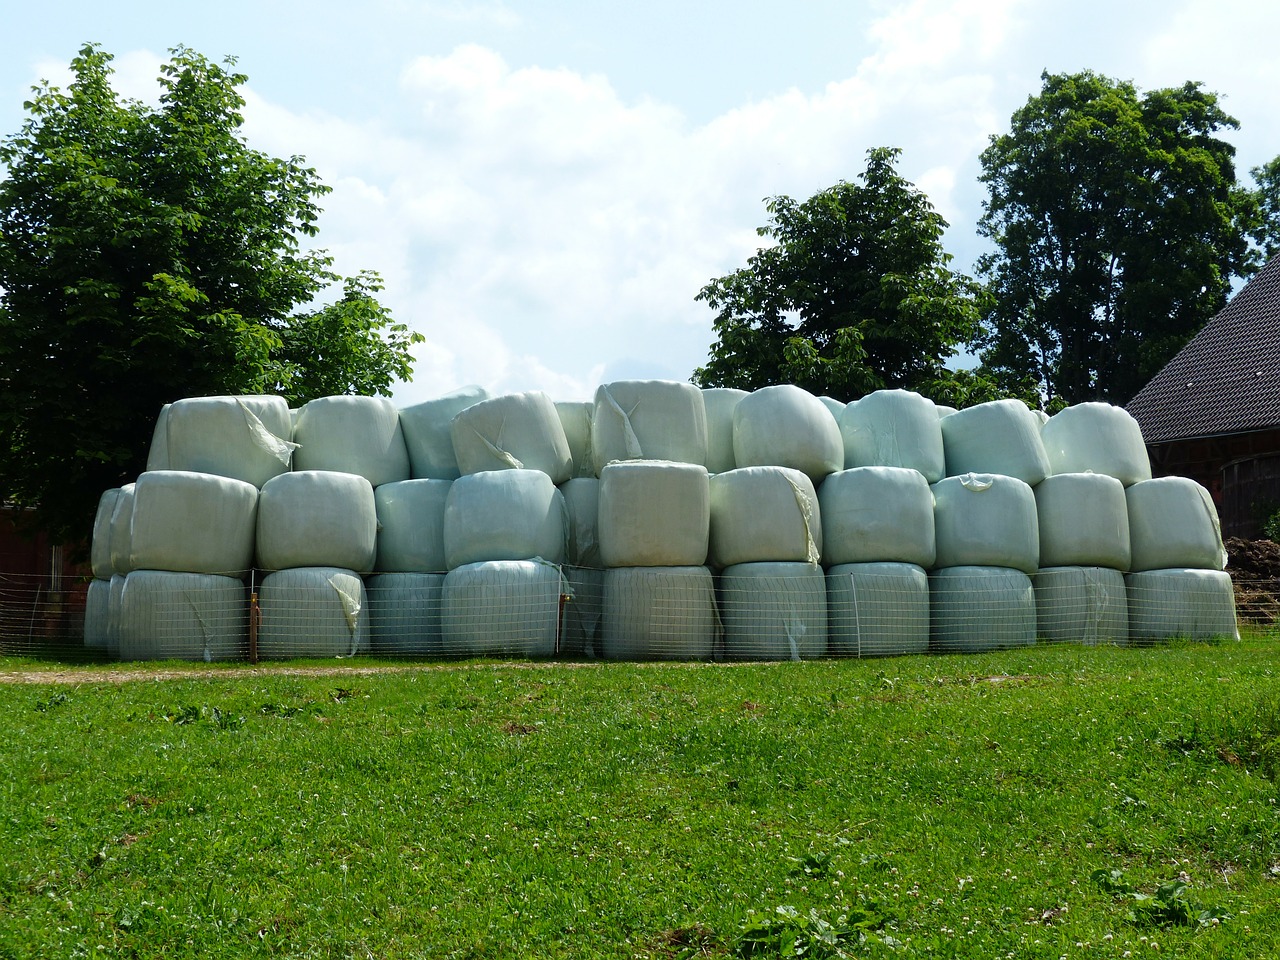 hay bales straw bales agriculture free photo